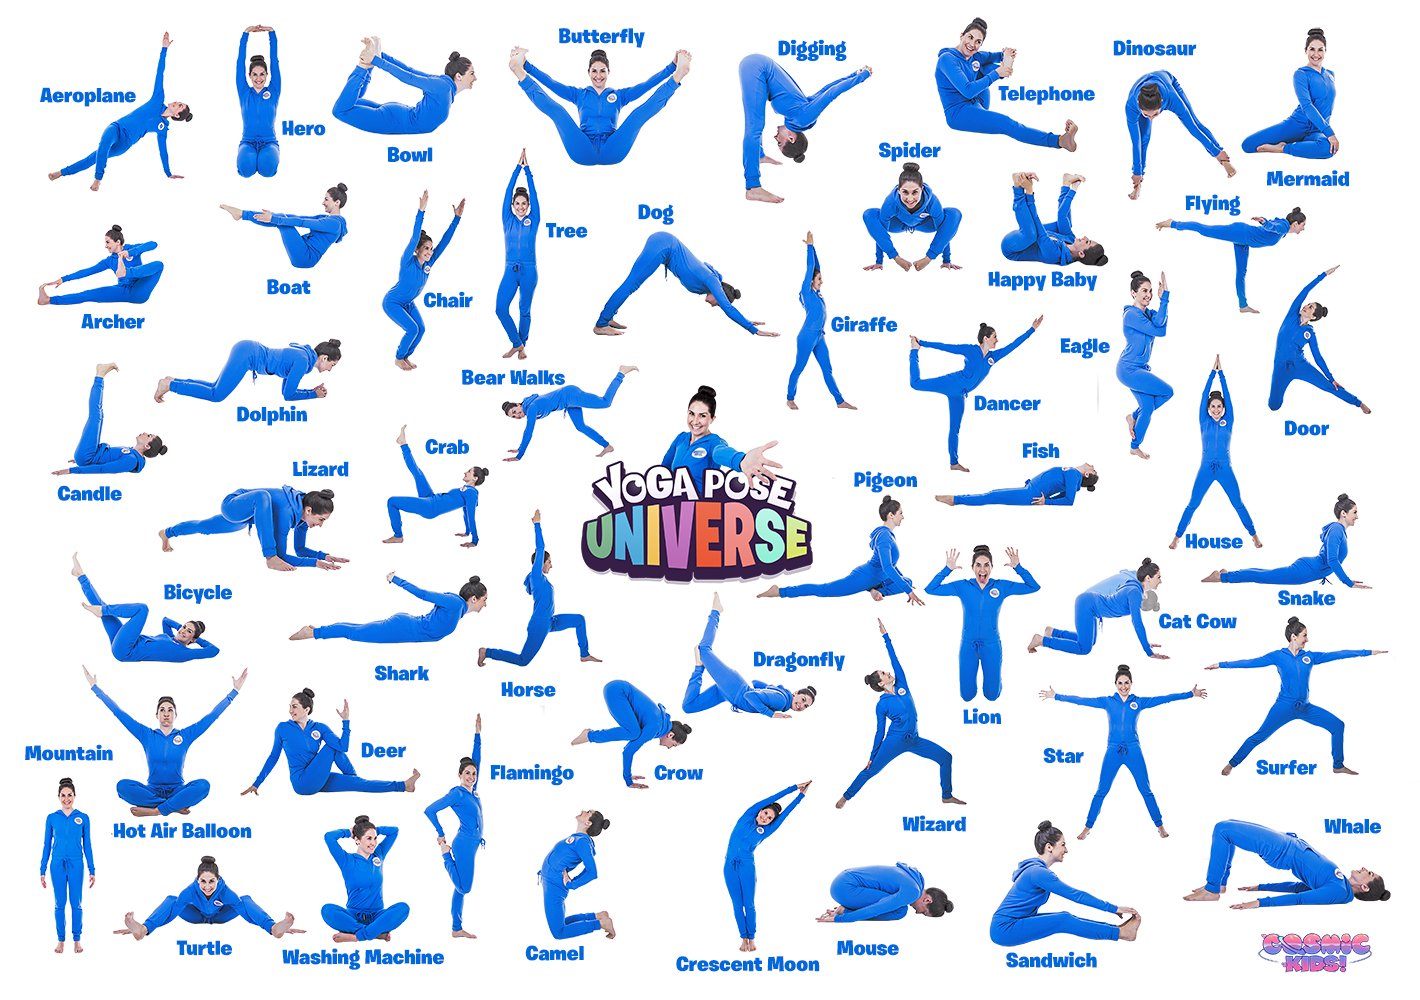 Cosmic Kids Yoga on Twitter: "Want a FREE yoga pose poster for the